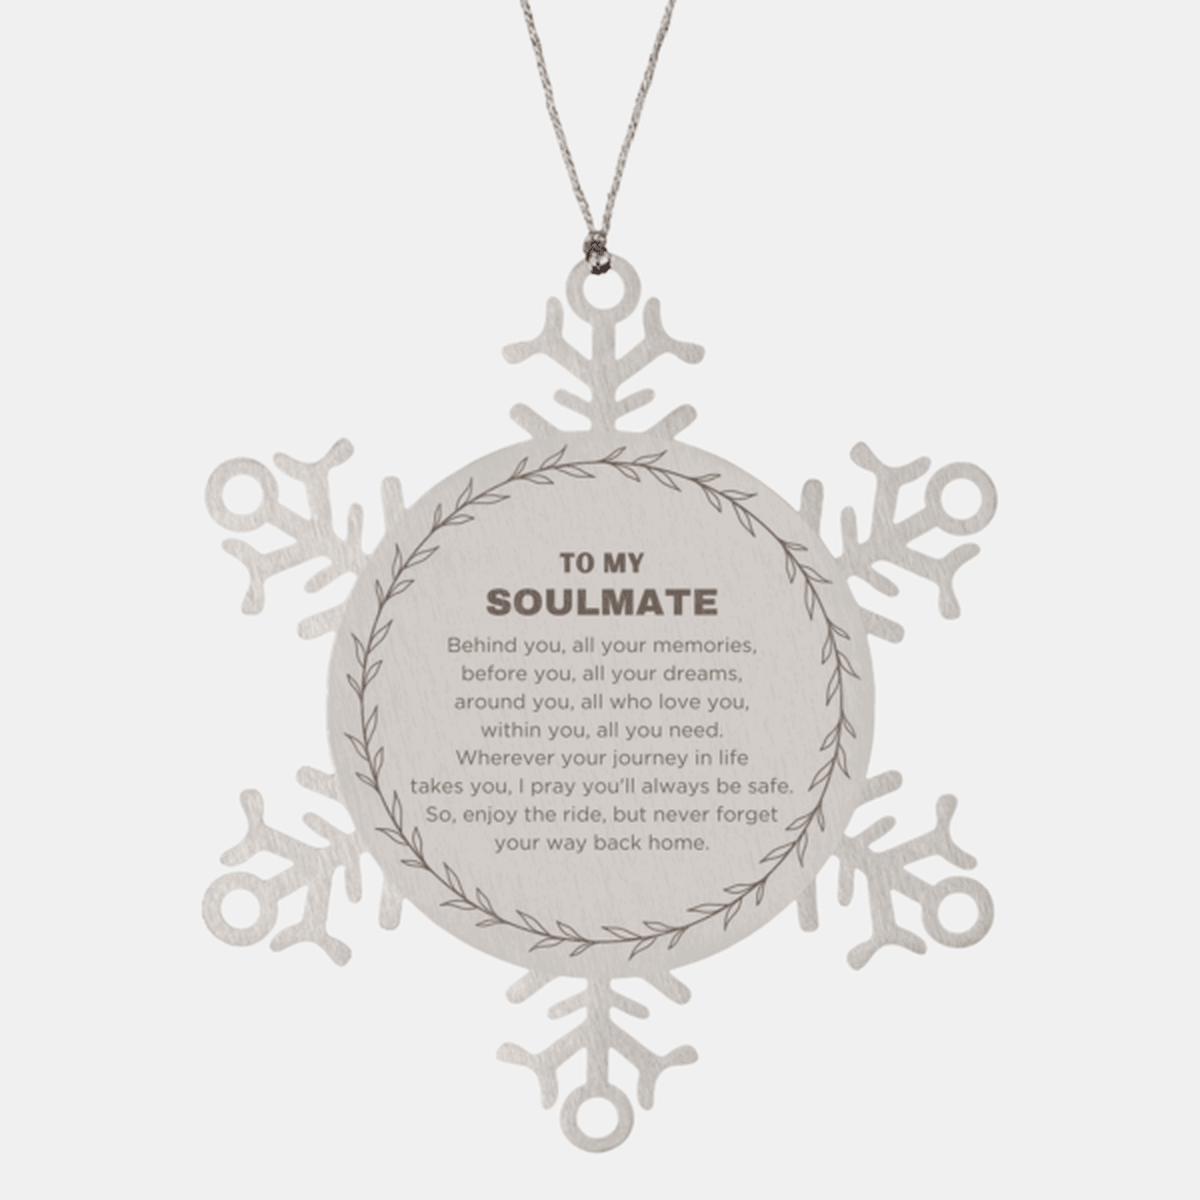 Inspirational Soulmate Snowflake Engraved Ornament - Behind you, all your Memories, Before you, all your Dreams - Birthday, Christmas Holiday Gifts - Mallard Moon Gift Shop